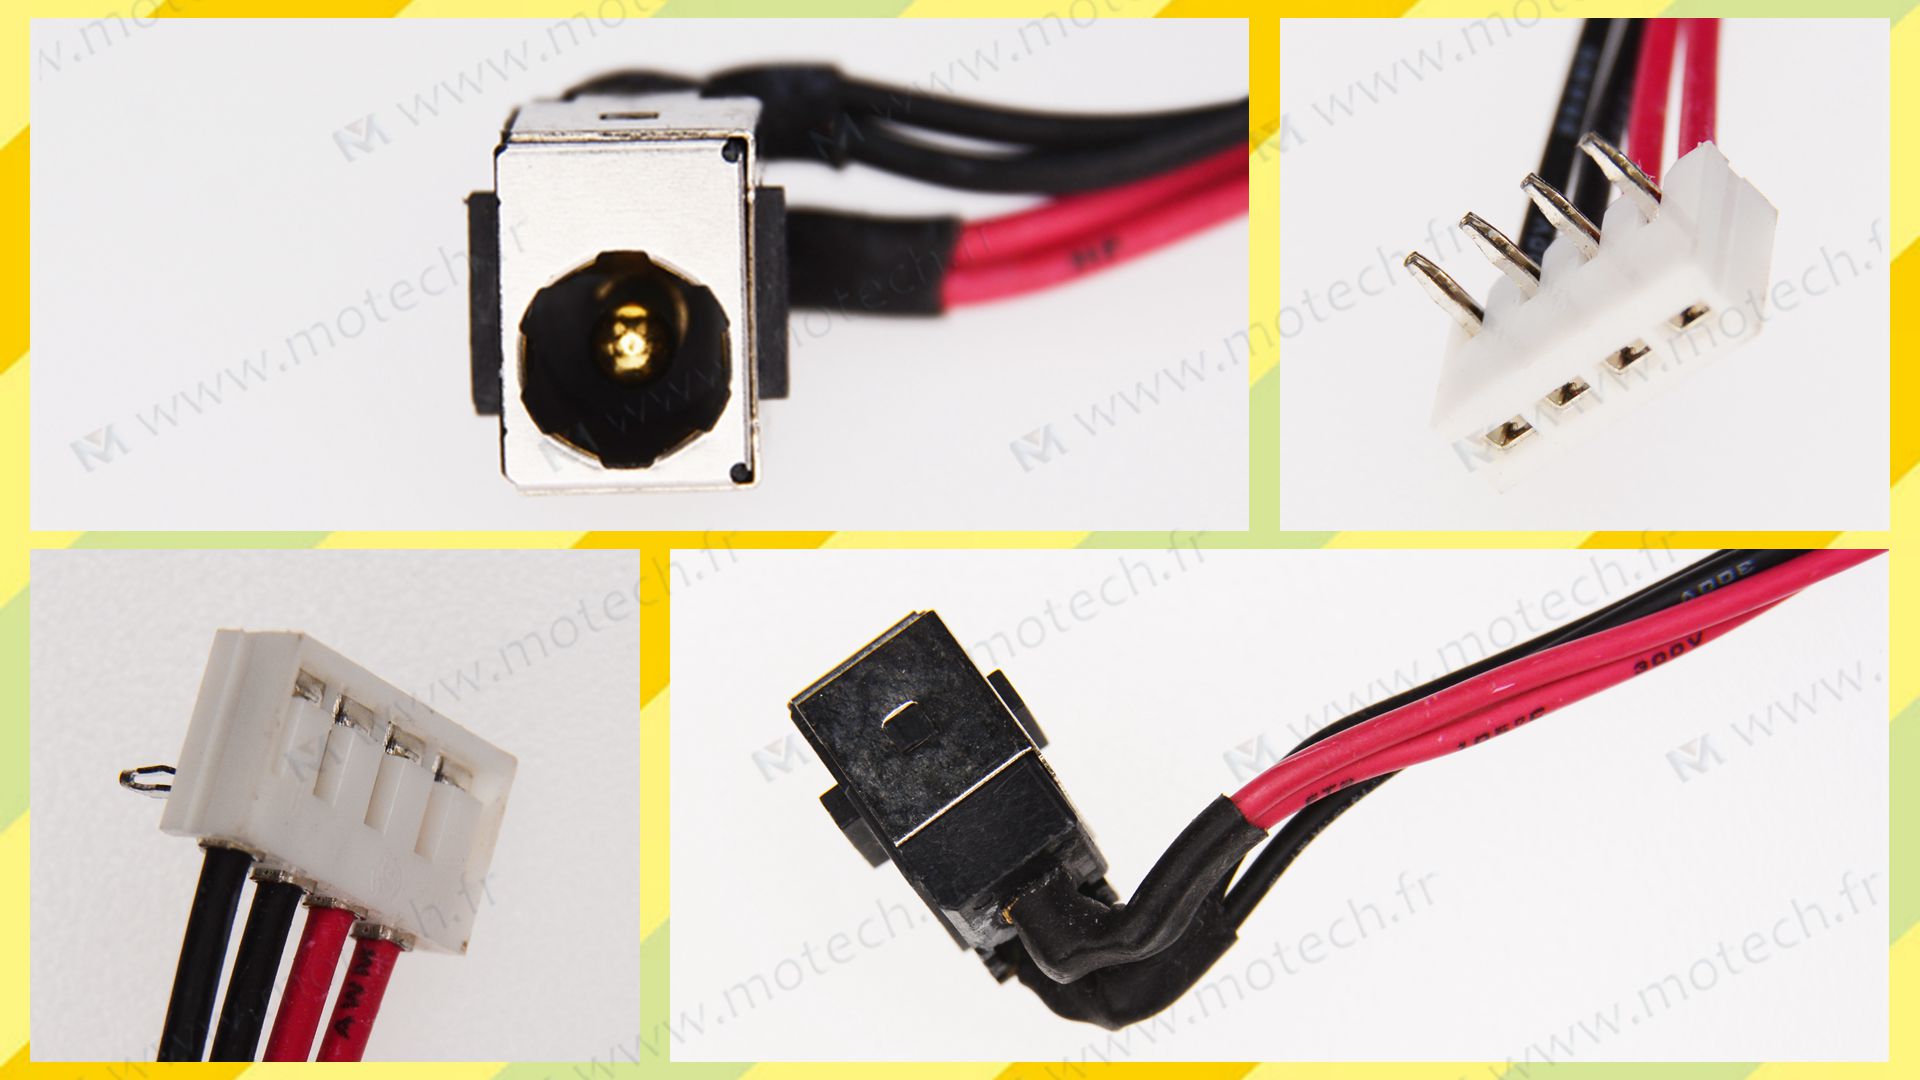 Toshiba L550 charging connector, Toshiba L550 DC Power Jack, Toshiba L550 DC IN Cable, Toshiba L550 Power Jack, Toshiba L550 plug, Toshiba L550 Jack socket, Toshiba L550 connecteur de charge, 